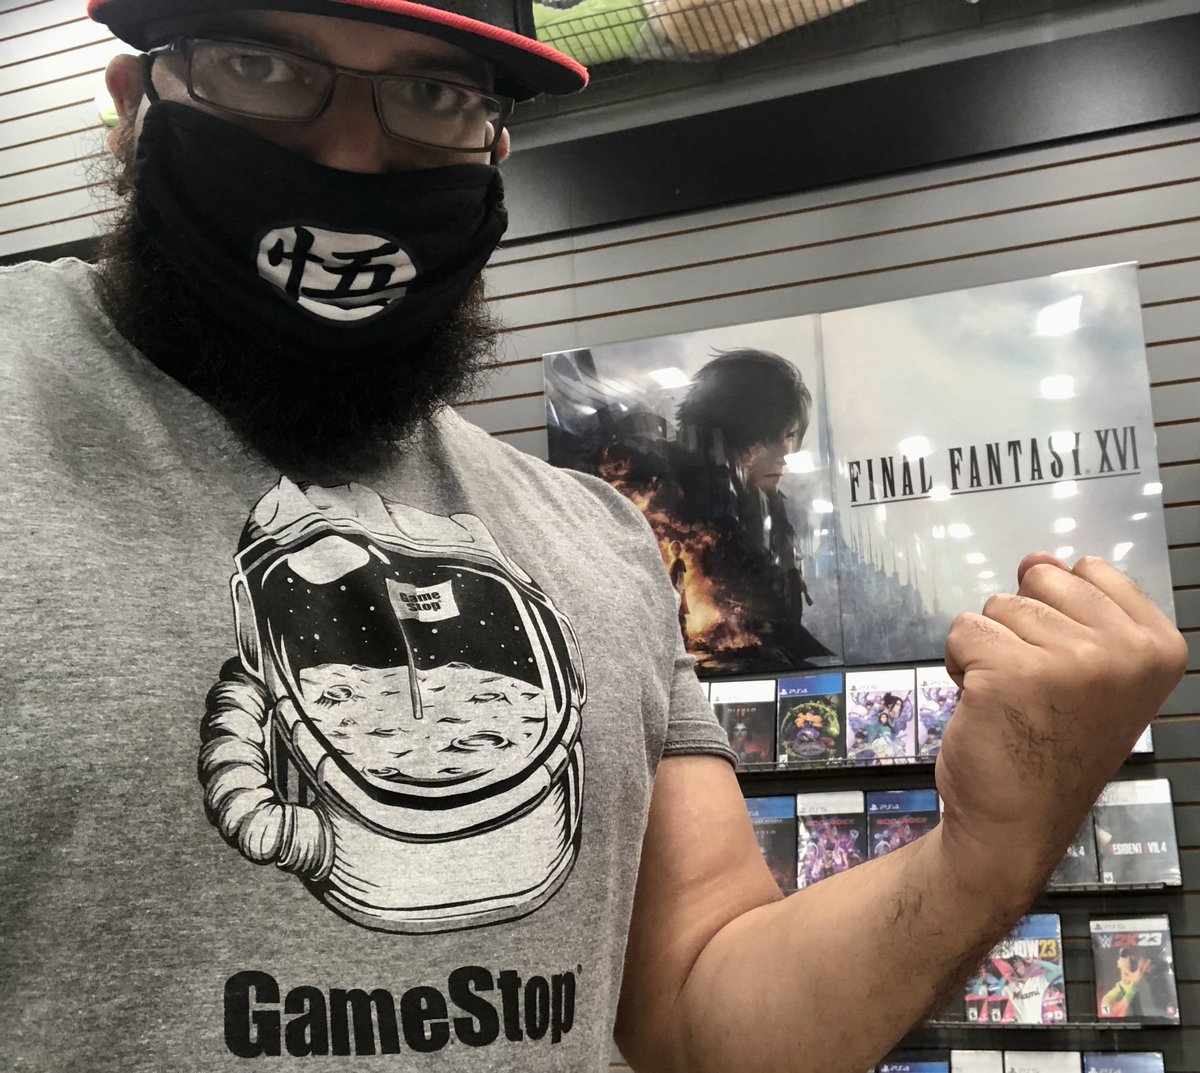 DAY 6 entry for the @finalfantasyxvi sweepstakes!

EXCLUSIVELY at @GameStop !

Can’t wait to see Clive in action!

(My gnarly beard is just a goatee now, btw lol)

💪

#16DaysFF16 

🐇🎮🏴‍☠️